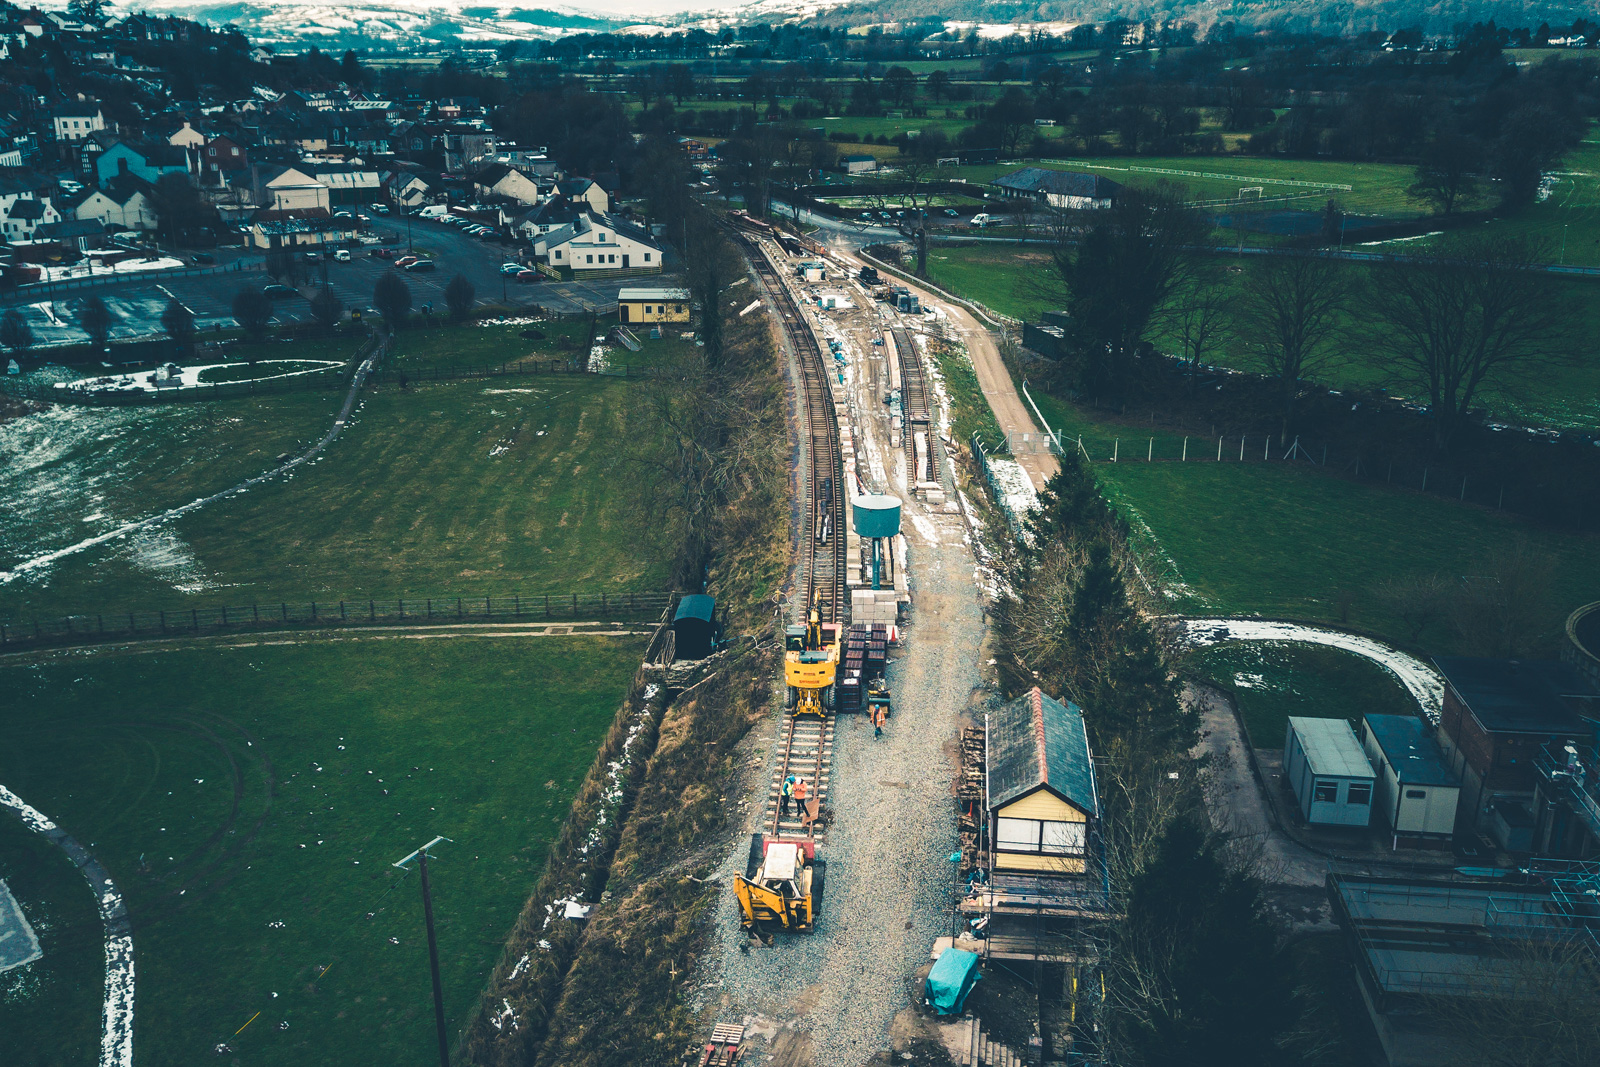 Drone image of construction on Llangollen Railway carried about by EW Partnership Limited